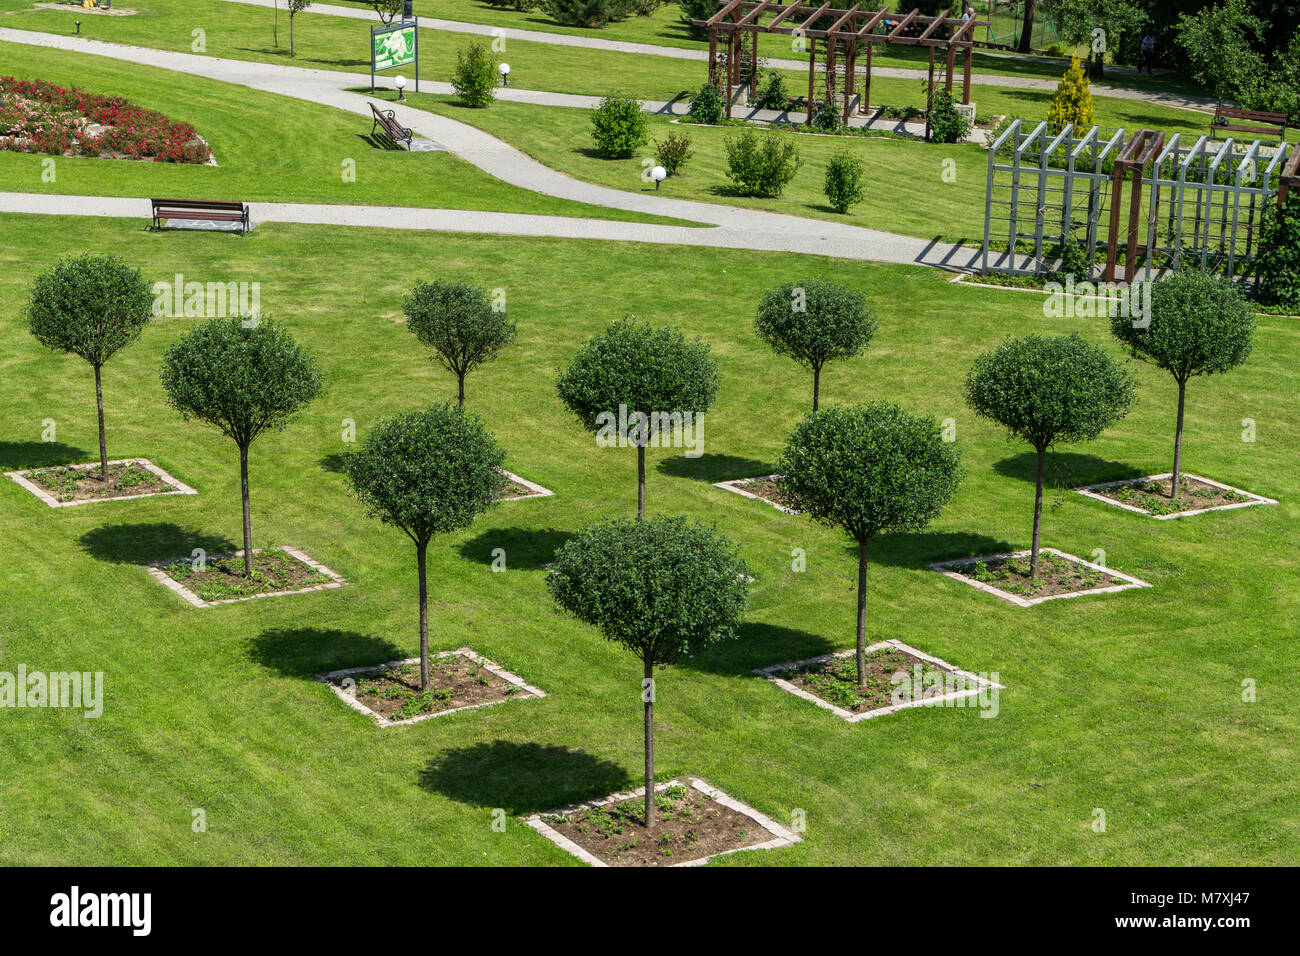 Green trees planted in line in the shape of triangle Stock Photo